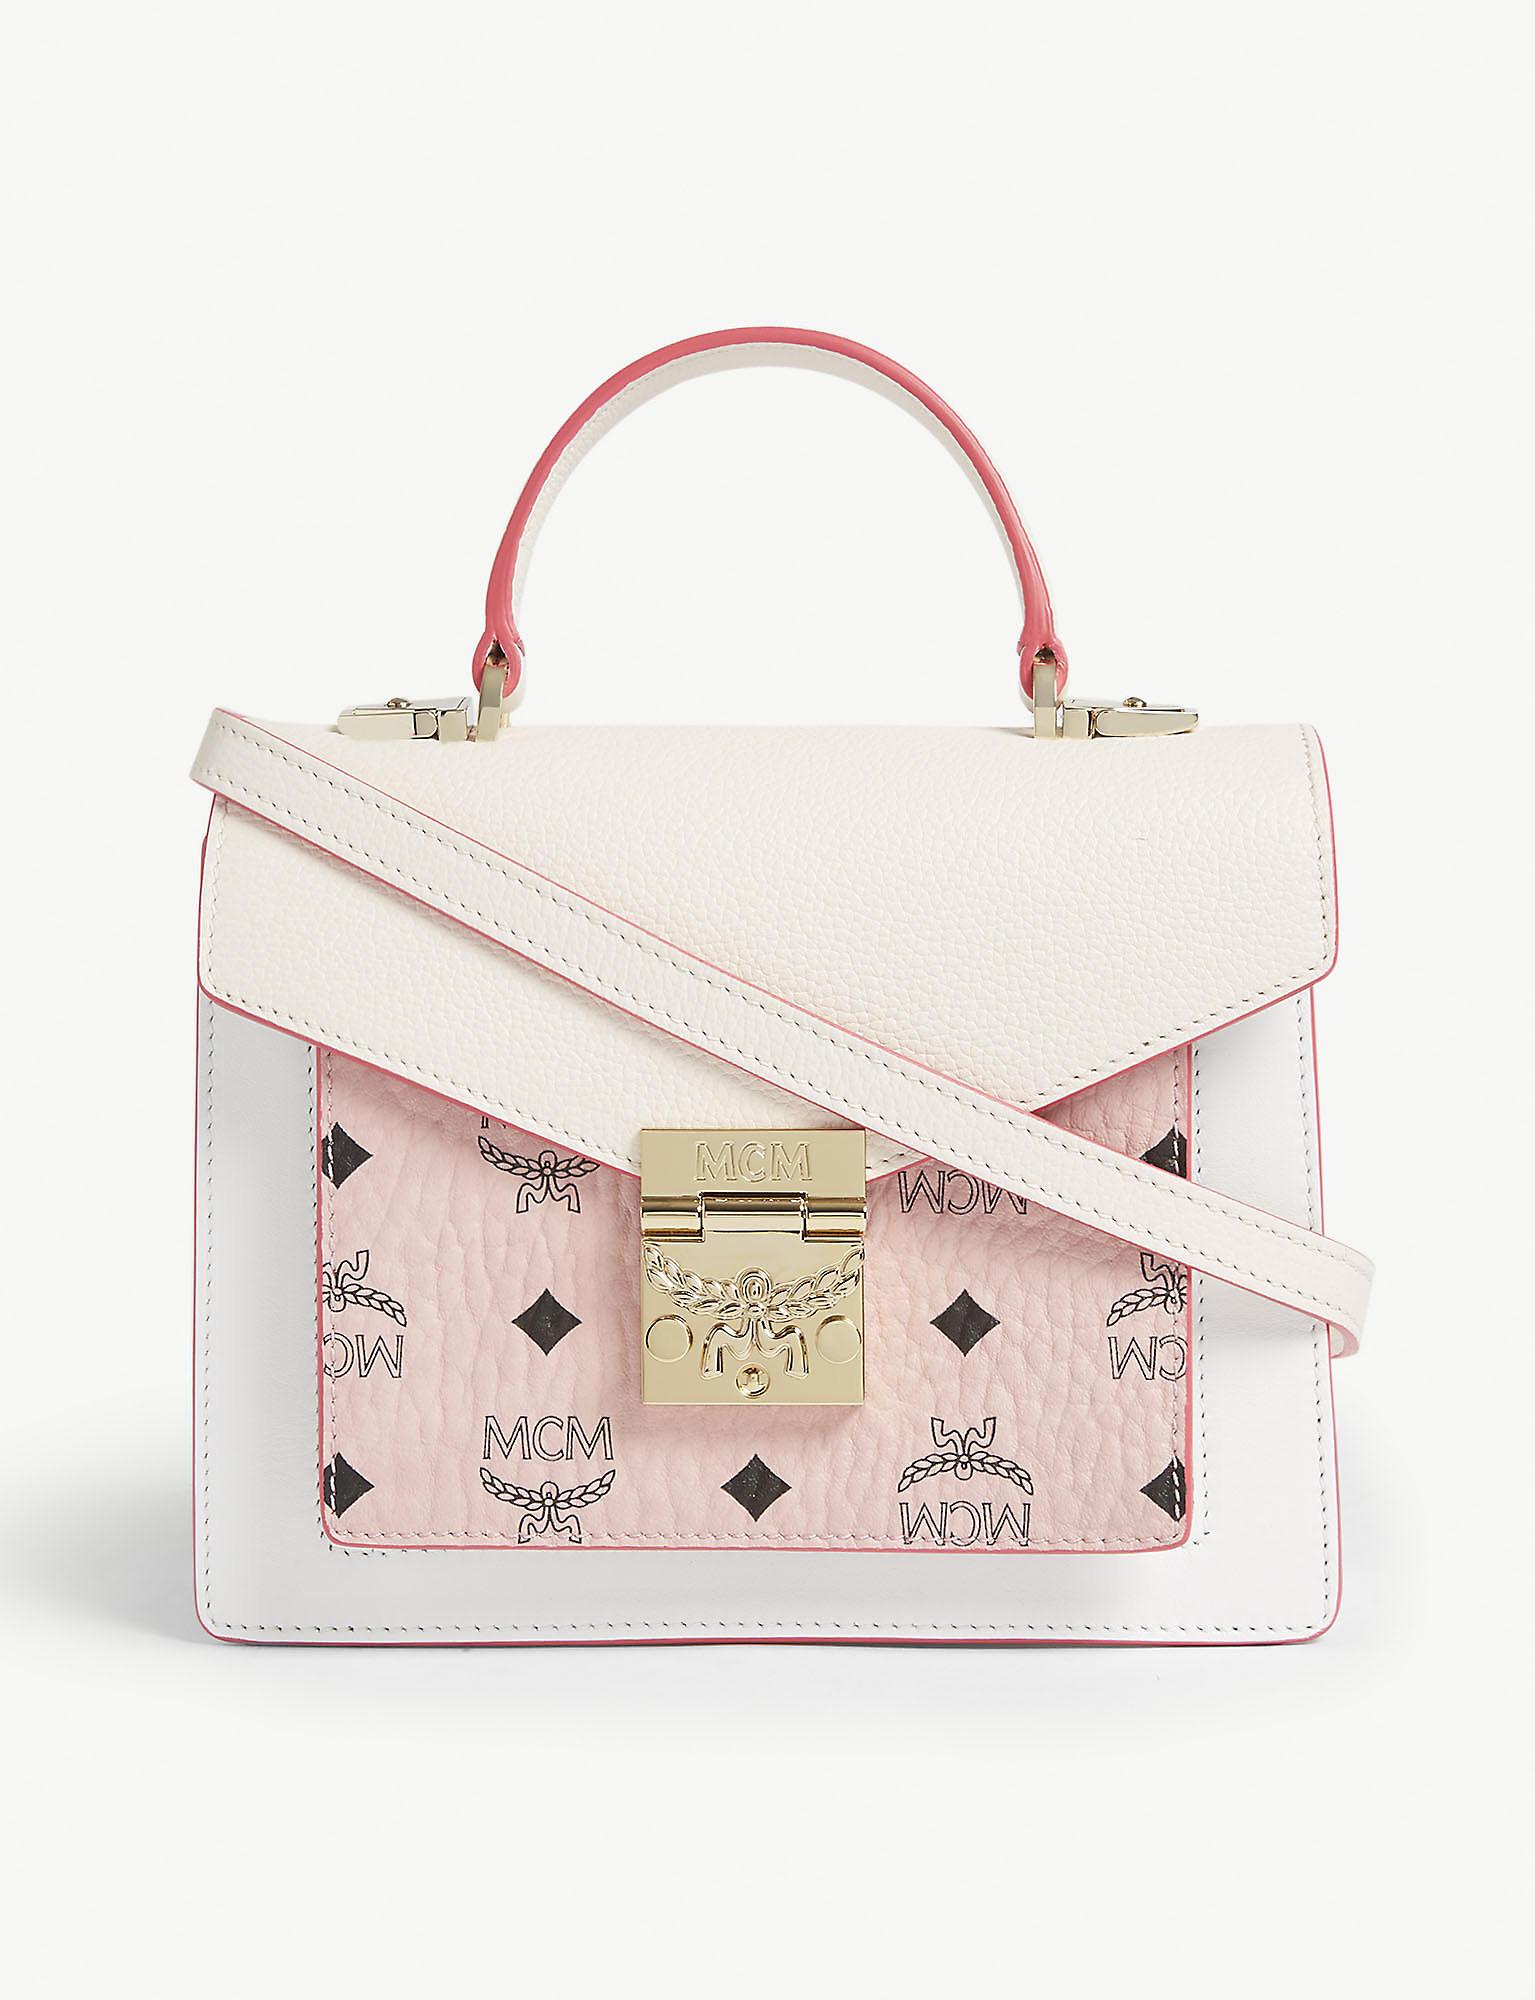 MCM - Looking for a bag that is both practical & stylish? Meet the #MCM  Patricia shoulder bag in Embellished Visetos